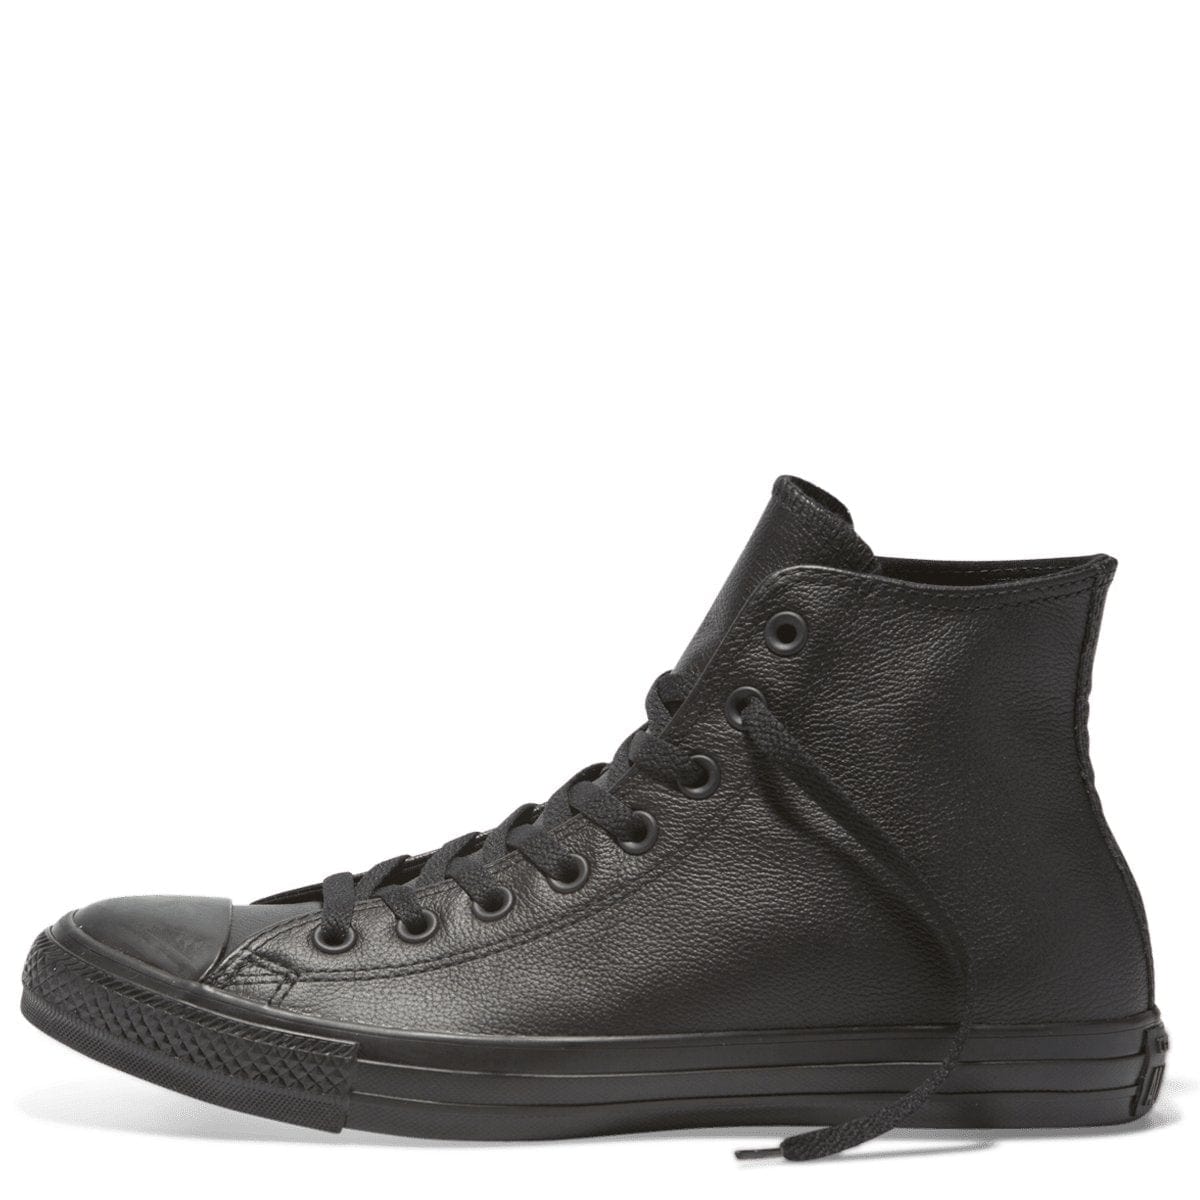 Converse CONVERSE WOMEN'S CHUCK TAYLOR ALL STAR HIGH TOP TRIPLE BLACK LEATHER SHOE - INSPORT